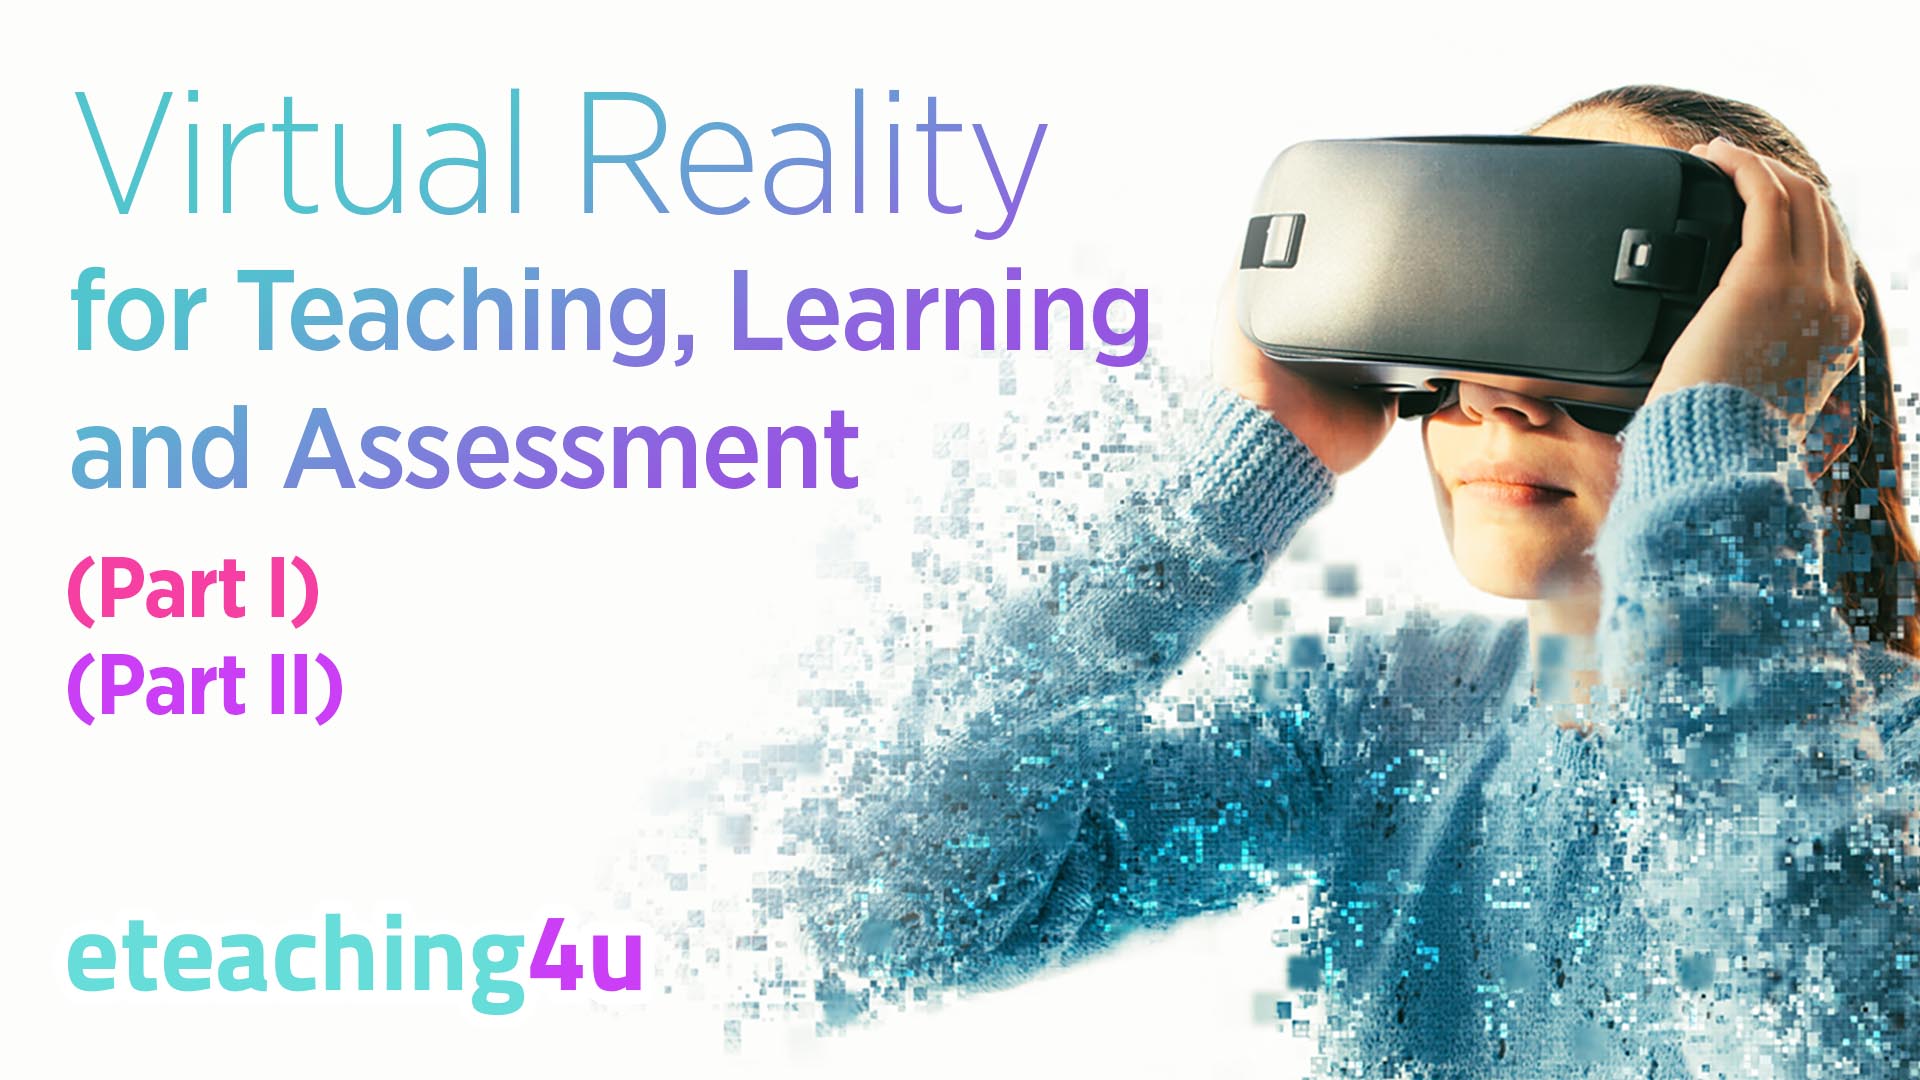 Virtual Reality for Teaching, Learning and Assessment